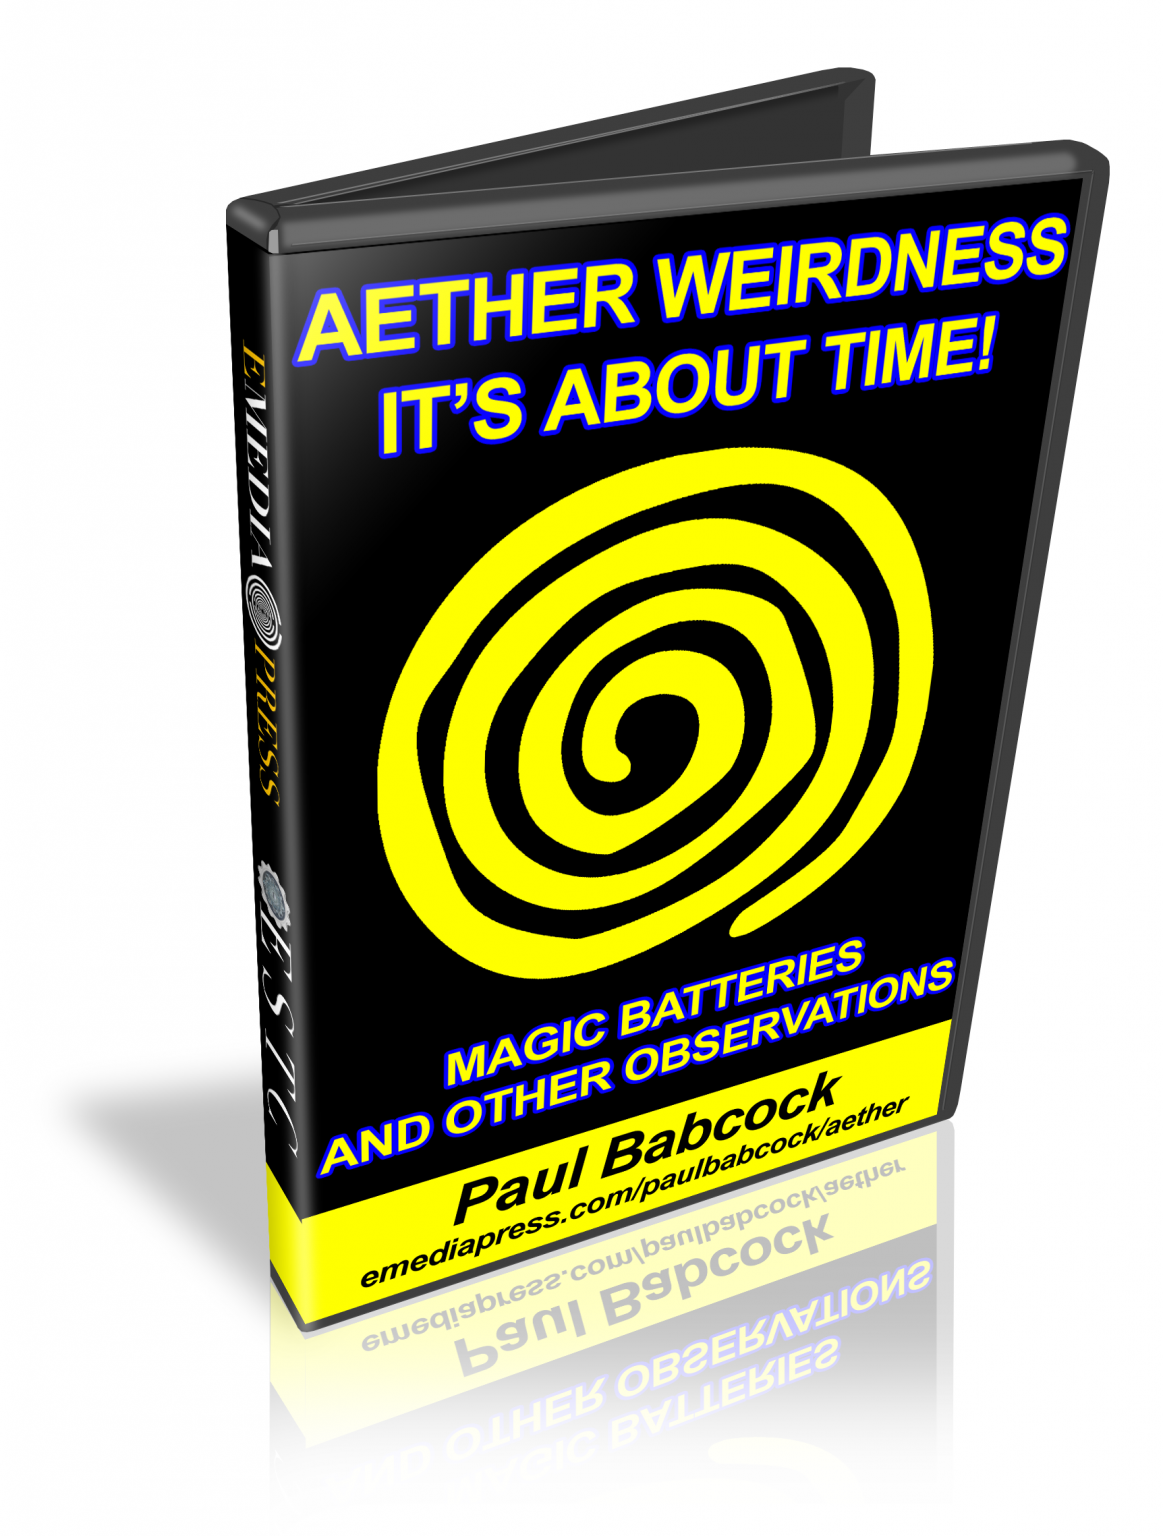 Aether Weirdness - It's about Time - Magic Batteries And Other Observations